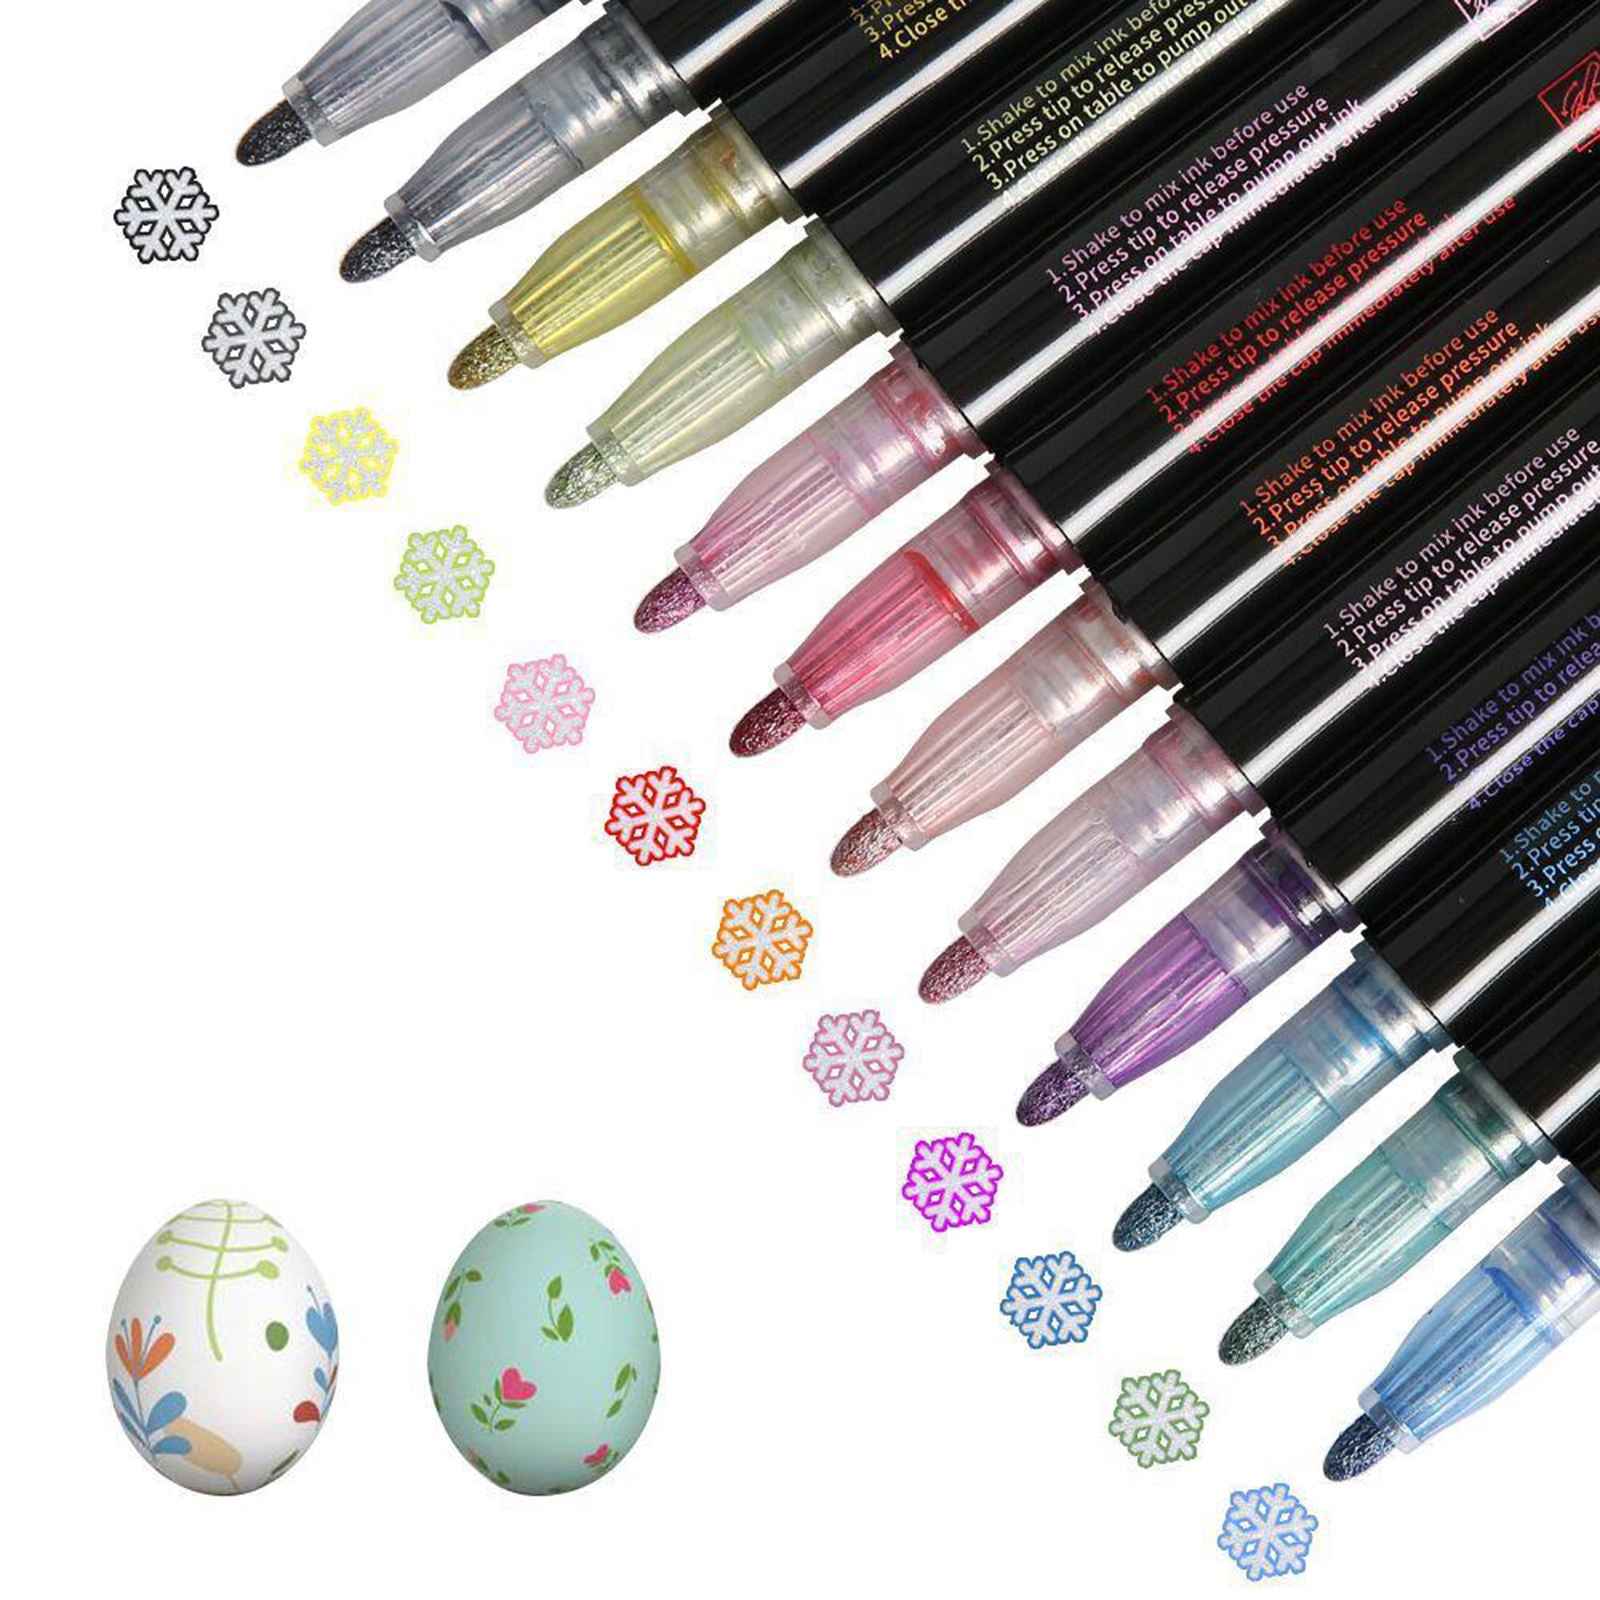 12 Colors Self Outline Metallic Markers Permanent Marker Pens Craft Markers Set